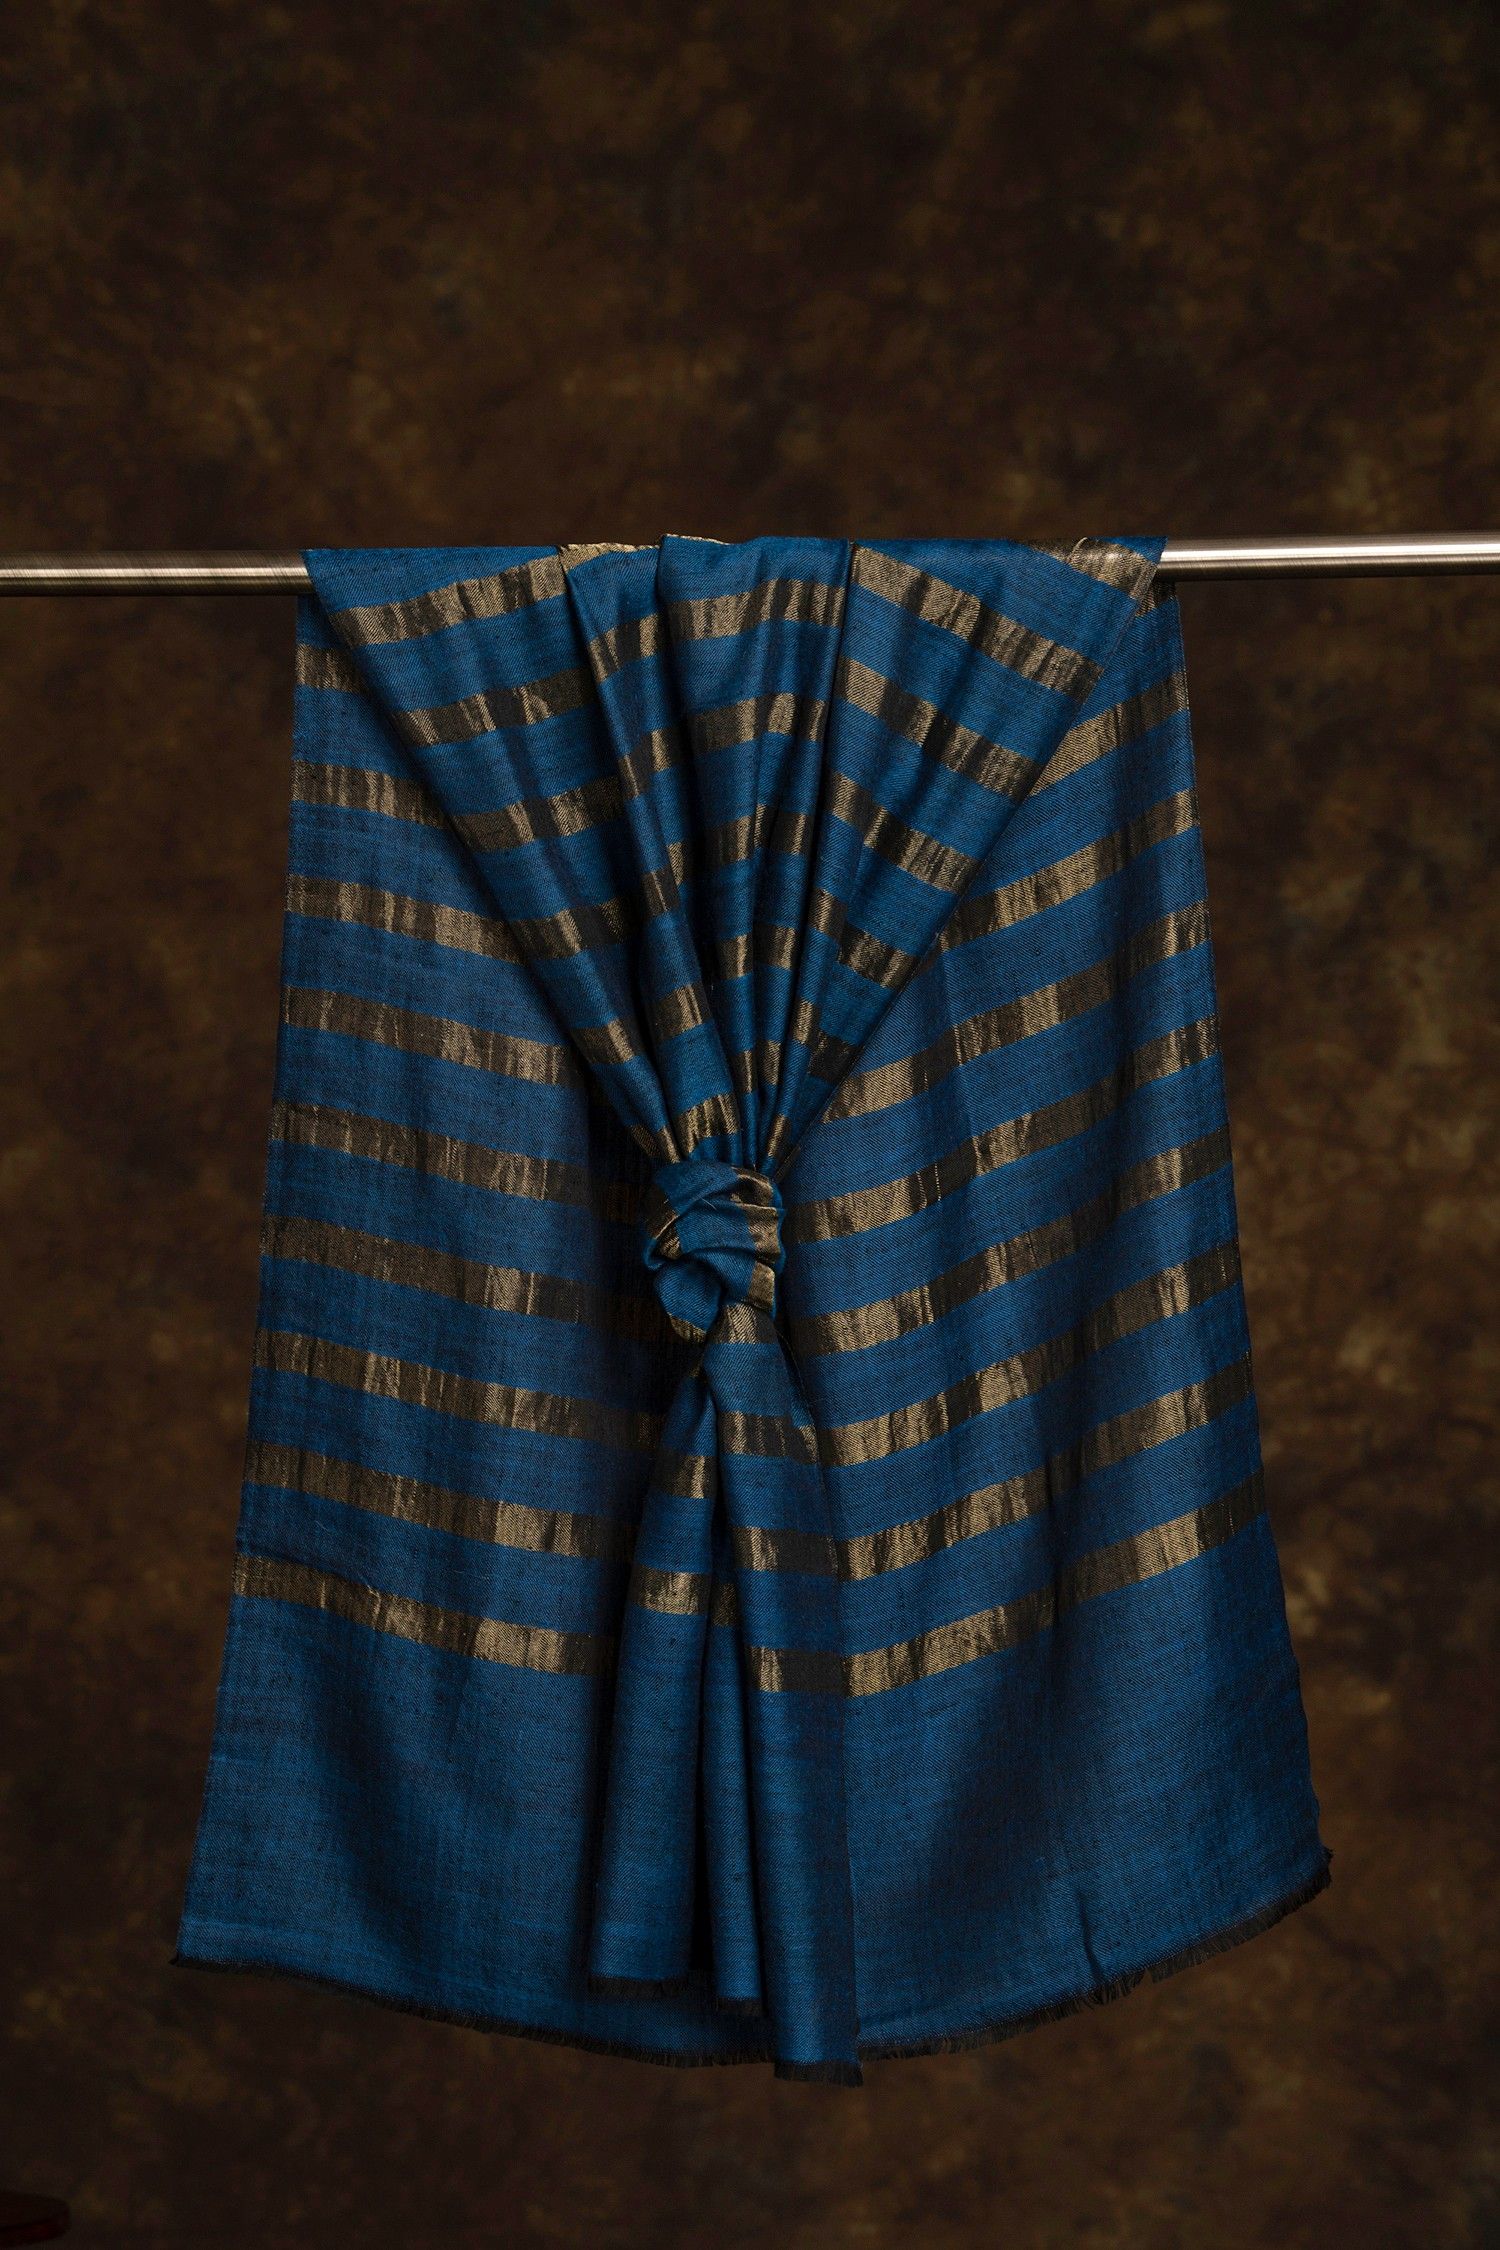 Shade of Ocean Blue Cashmere Scarf